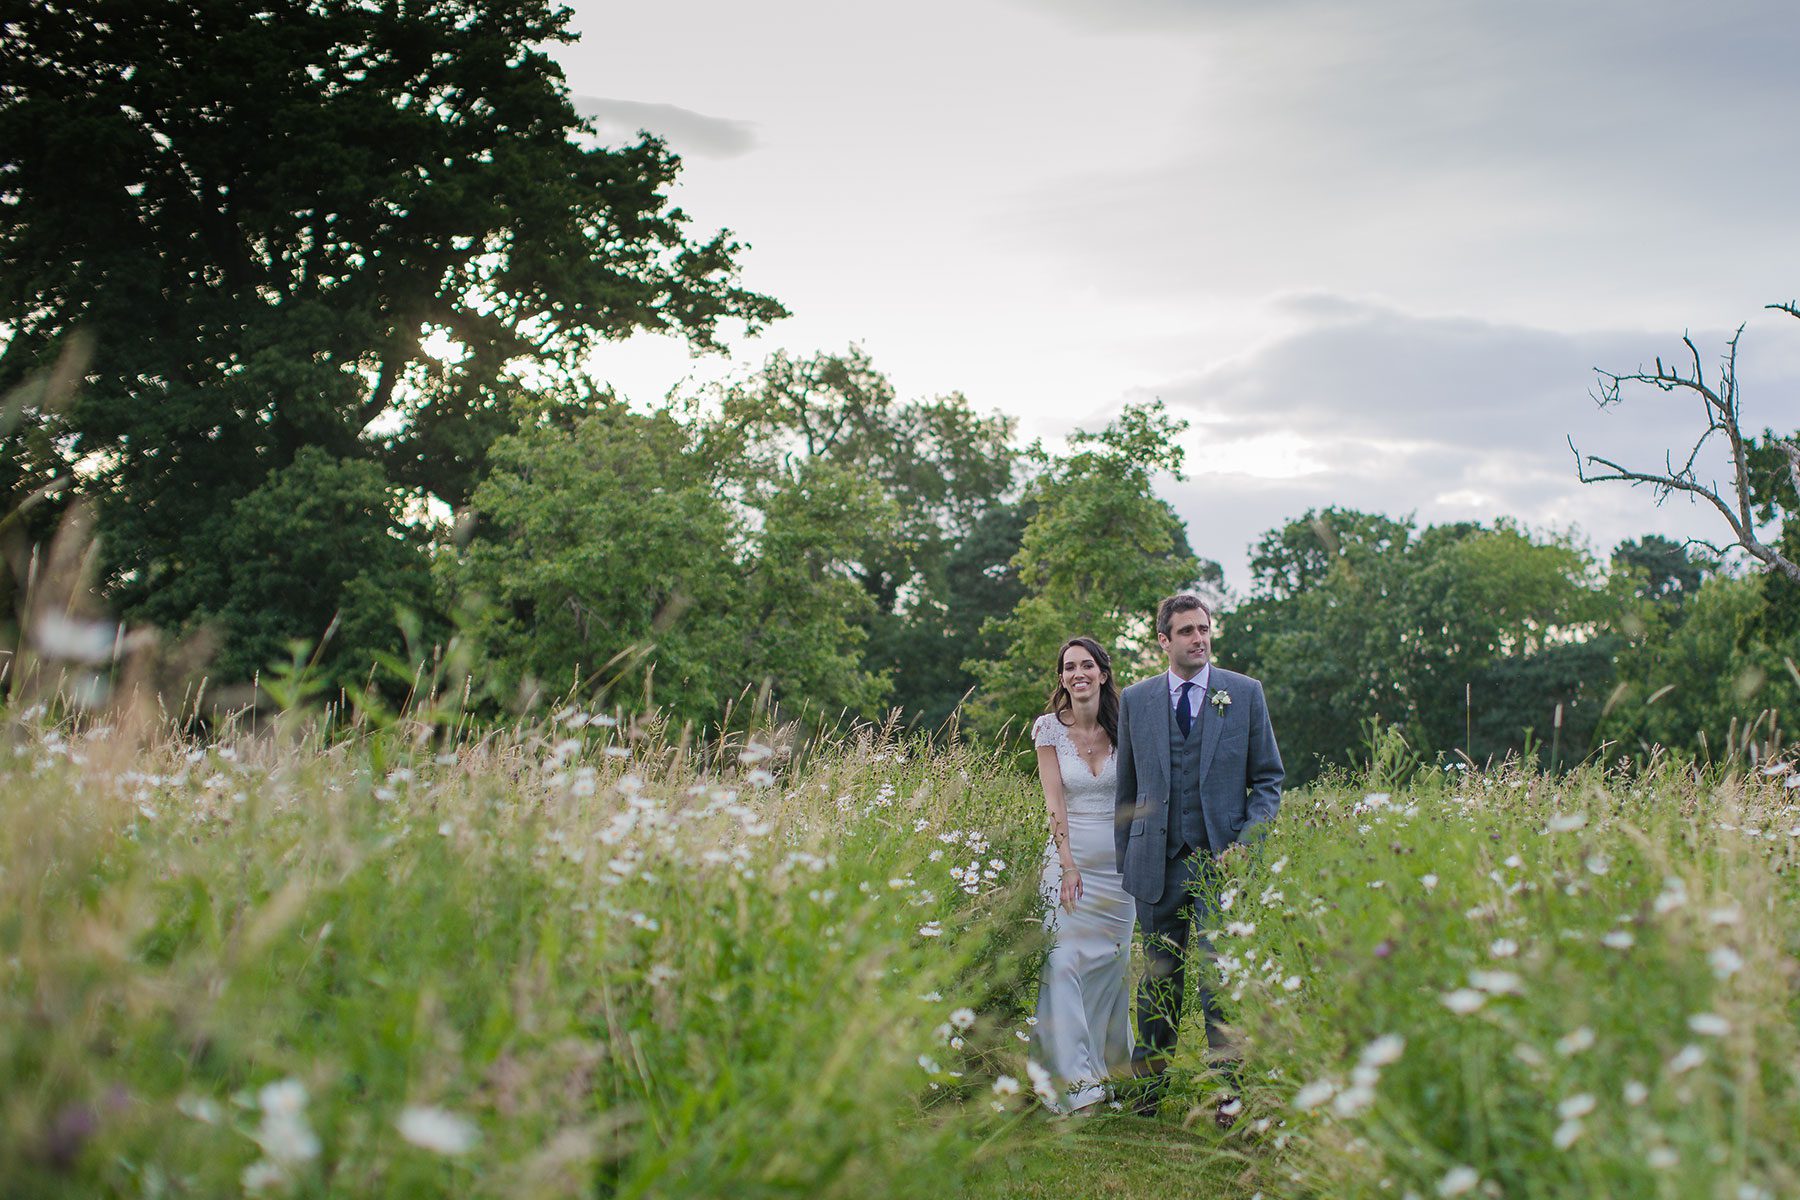 On the right path - Reportage Wedding Photography in Cheltenham | Bullit Photography